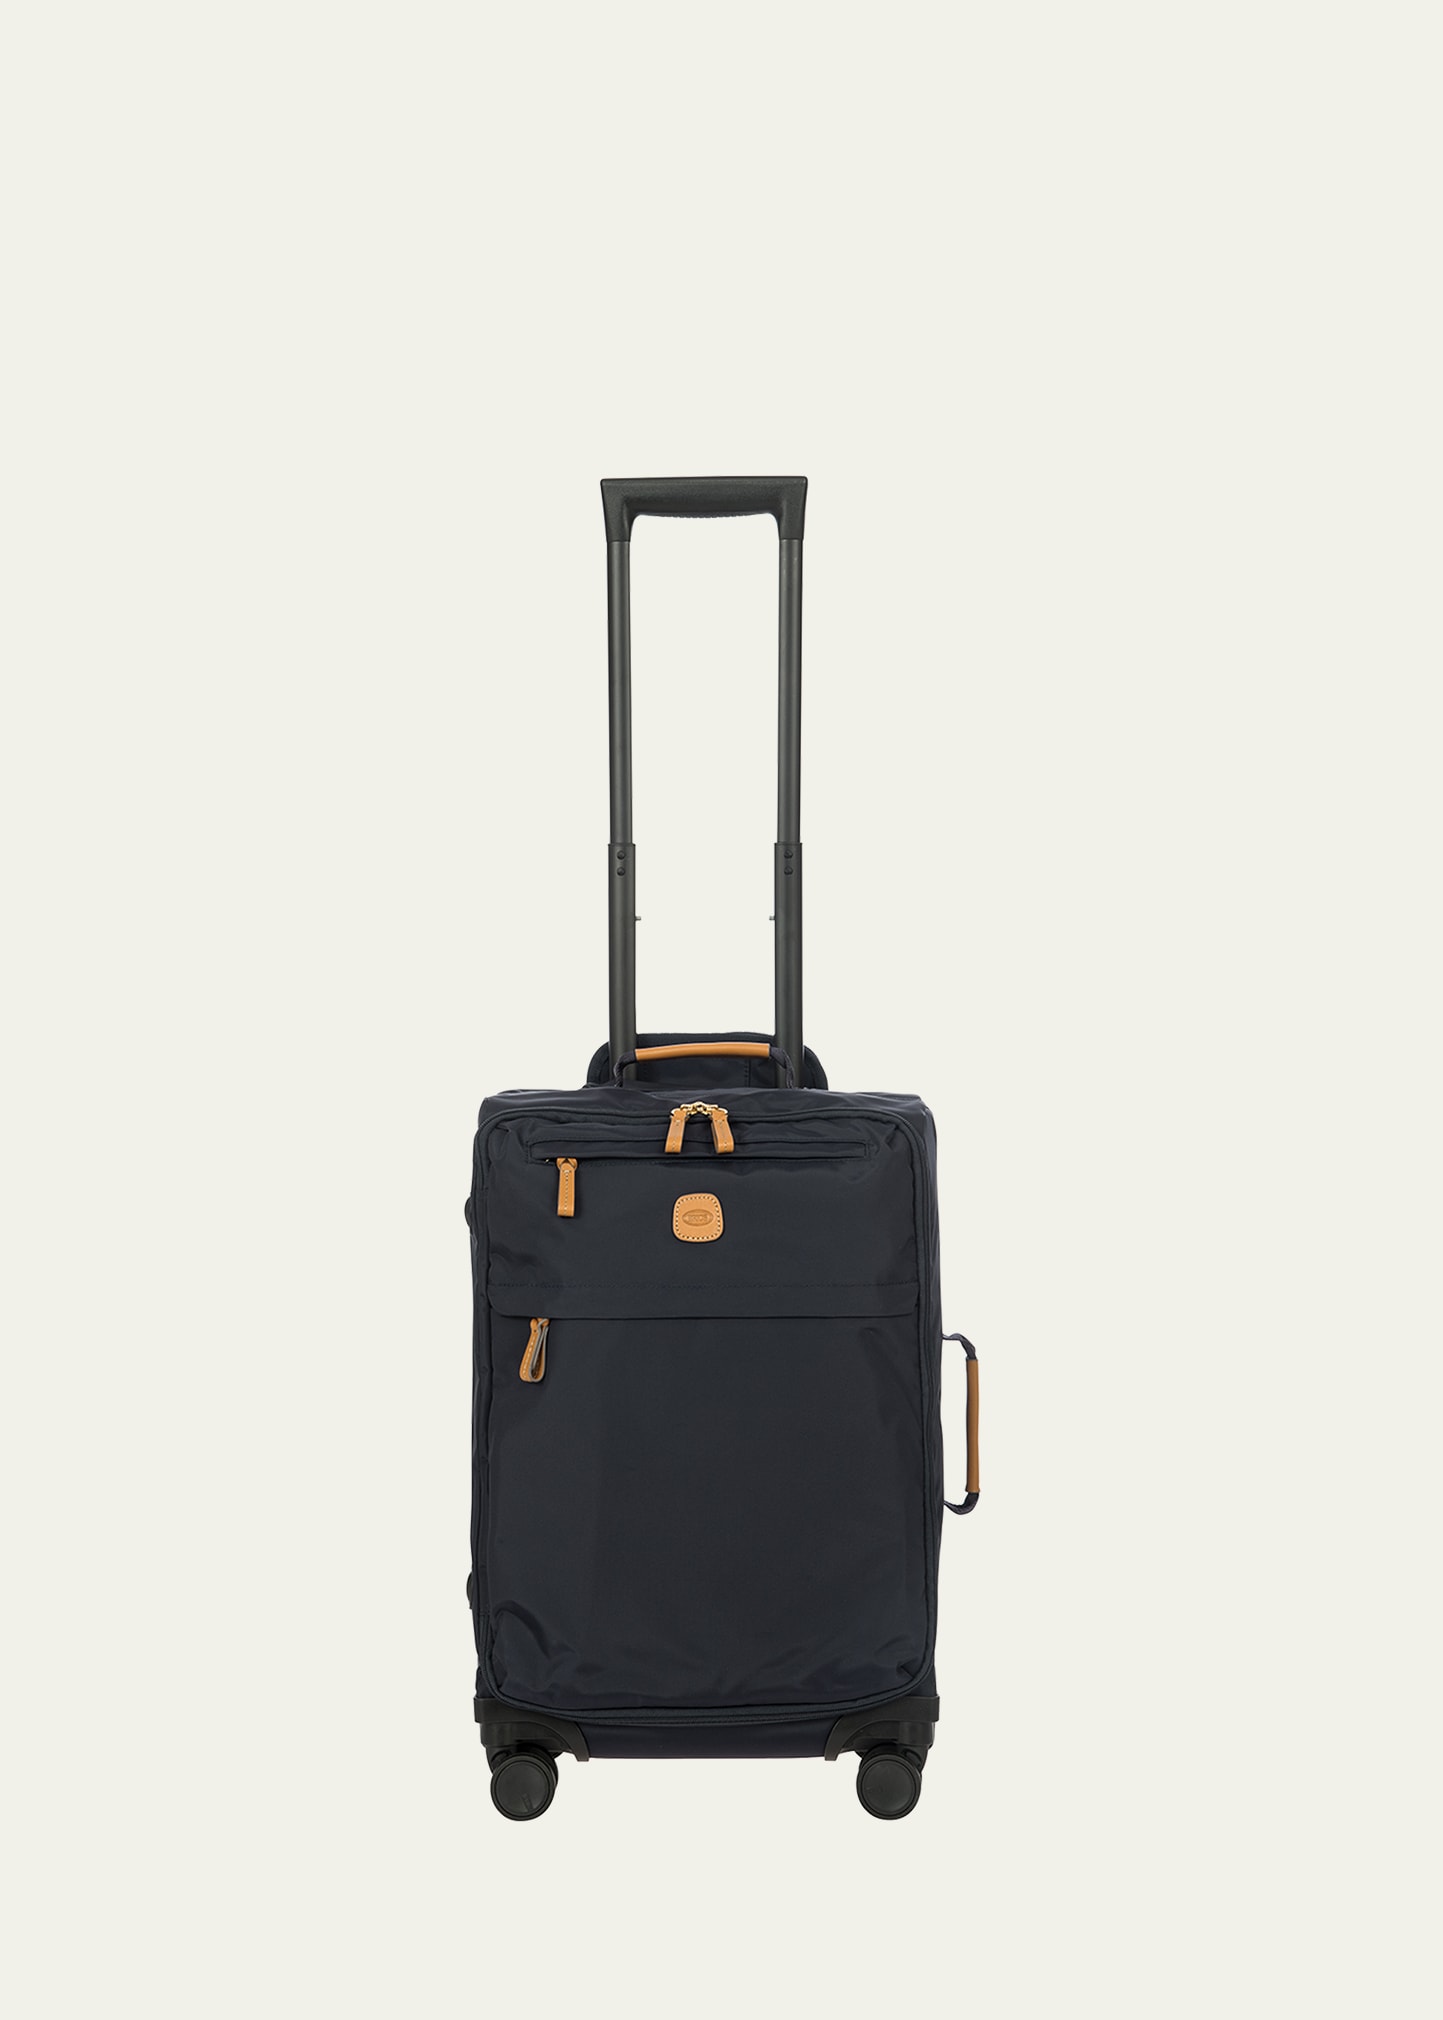 X-Travel 21" Carry-On Spinner Luggage